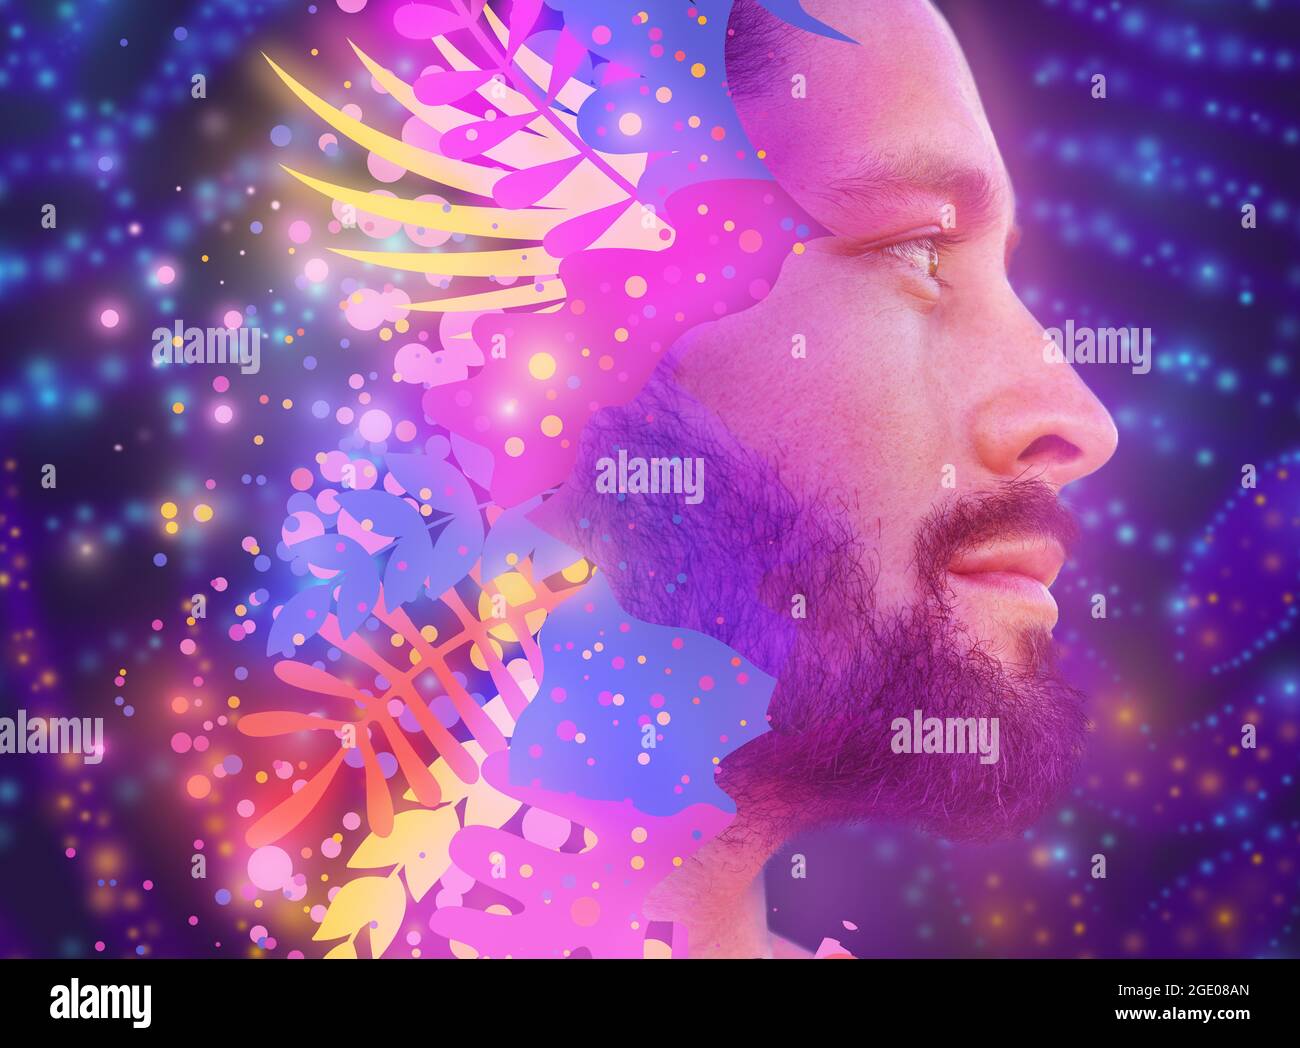 A digitally manipulated artistic colorful portrait of a man's profile Stock Photo